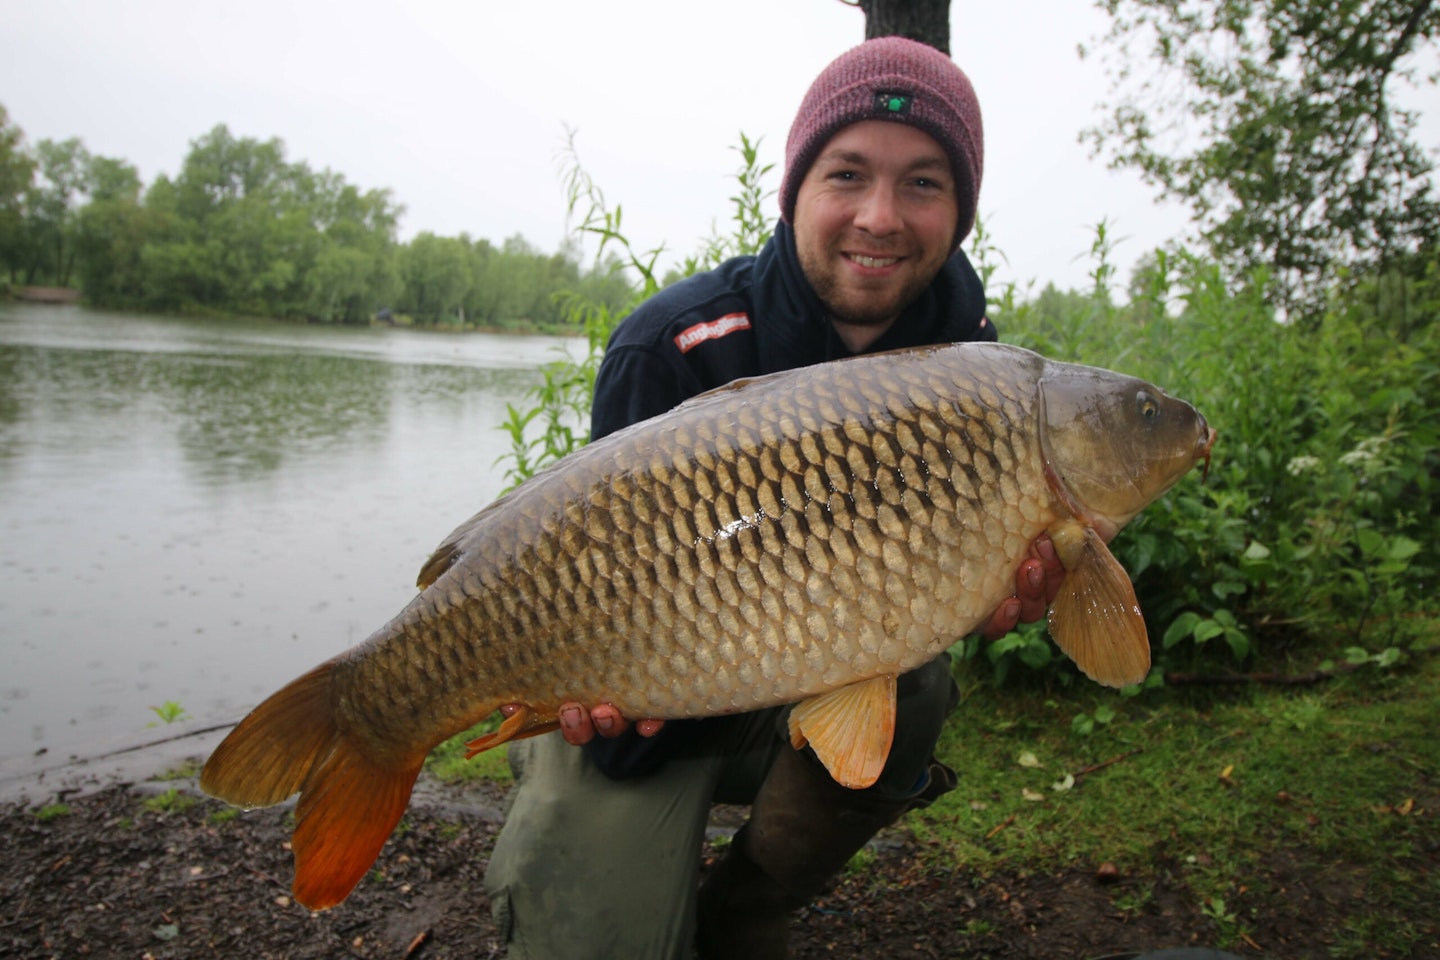 Successful carp fishing is all down to fine tuning the little things.